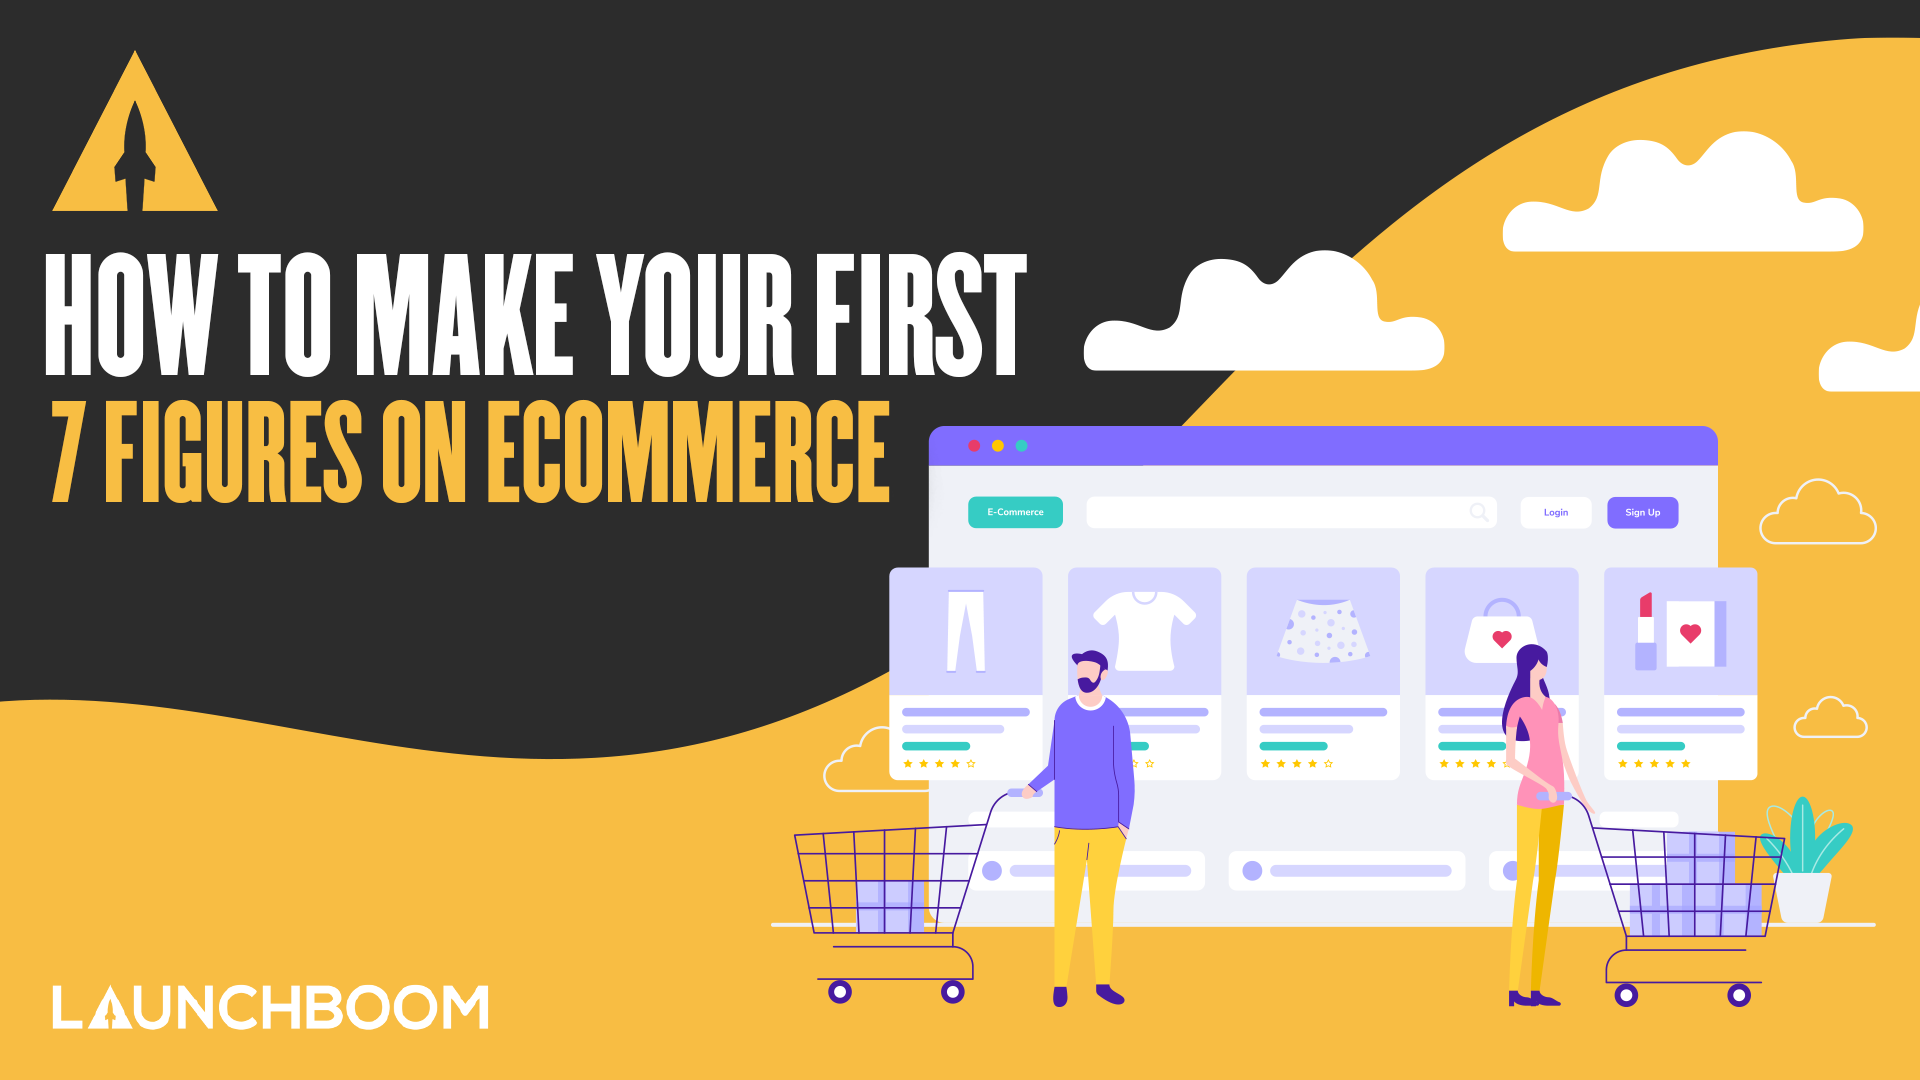 How to Make Your First 7 Figures on eCommerce